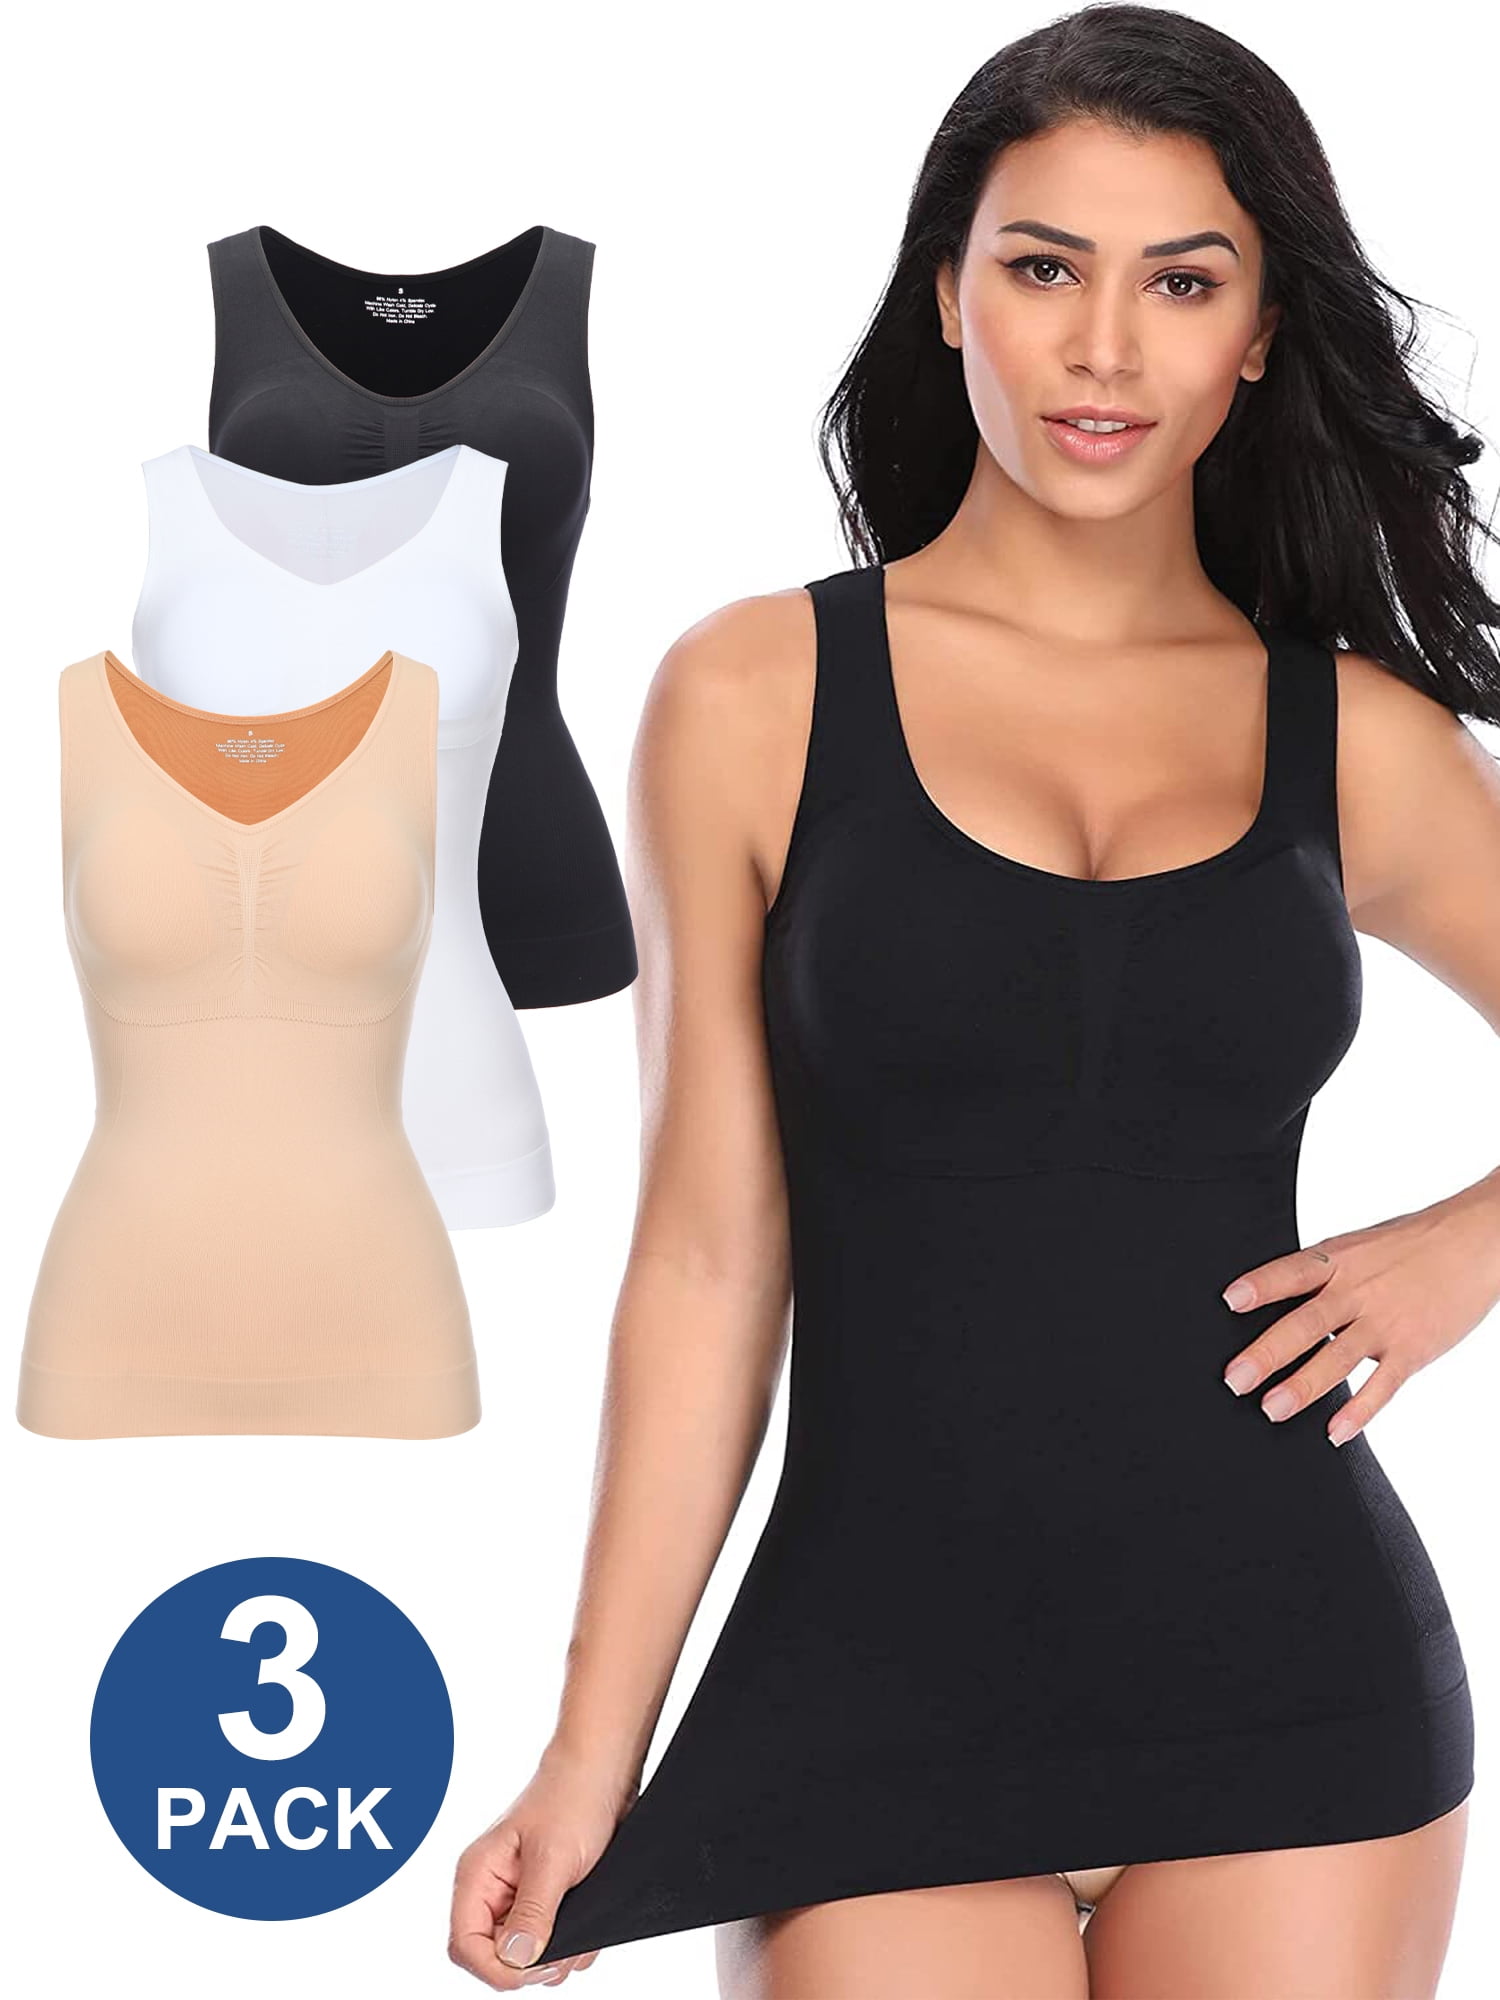 QRIC 3 Pack Women Comfy Tank Tops with Shelf Bra Tanks for Layering  Undershirts Wide Strap Basic Cami 